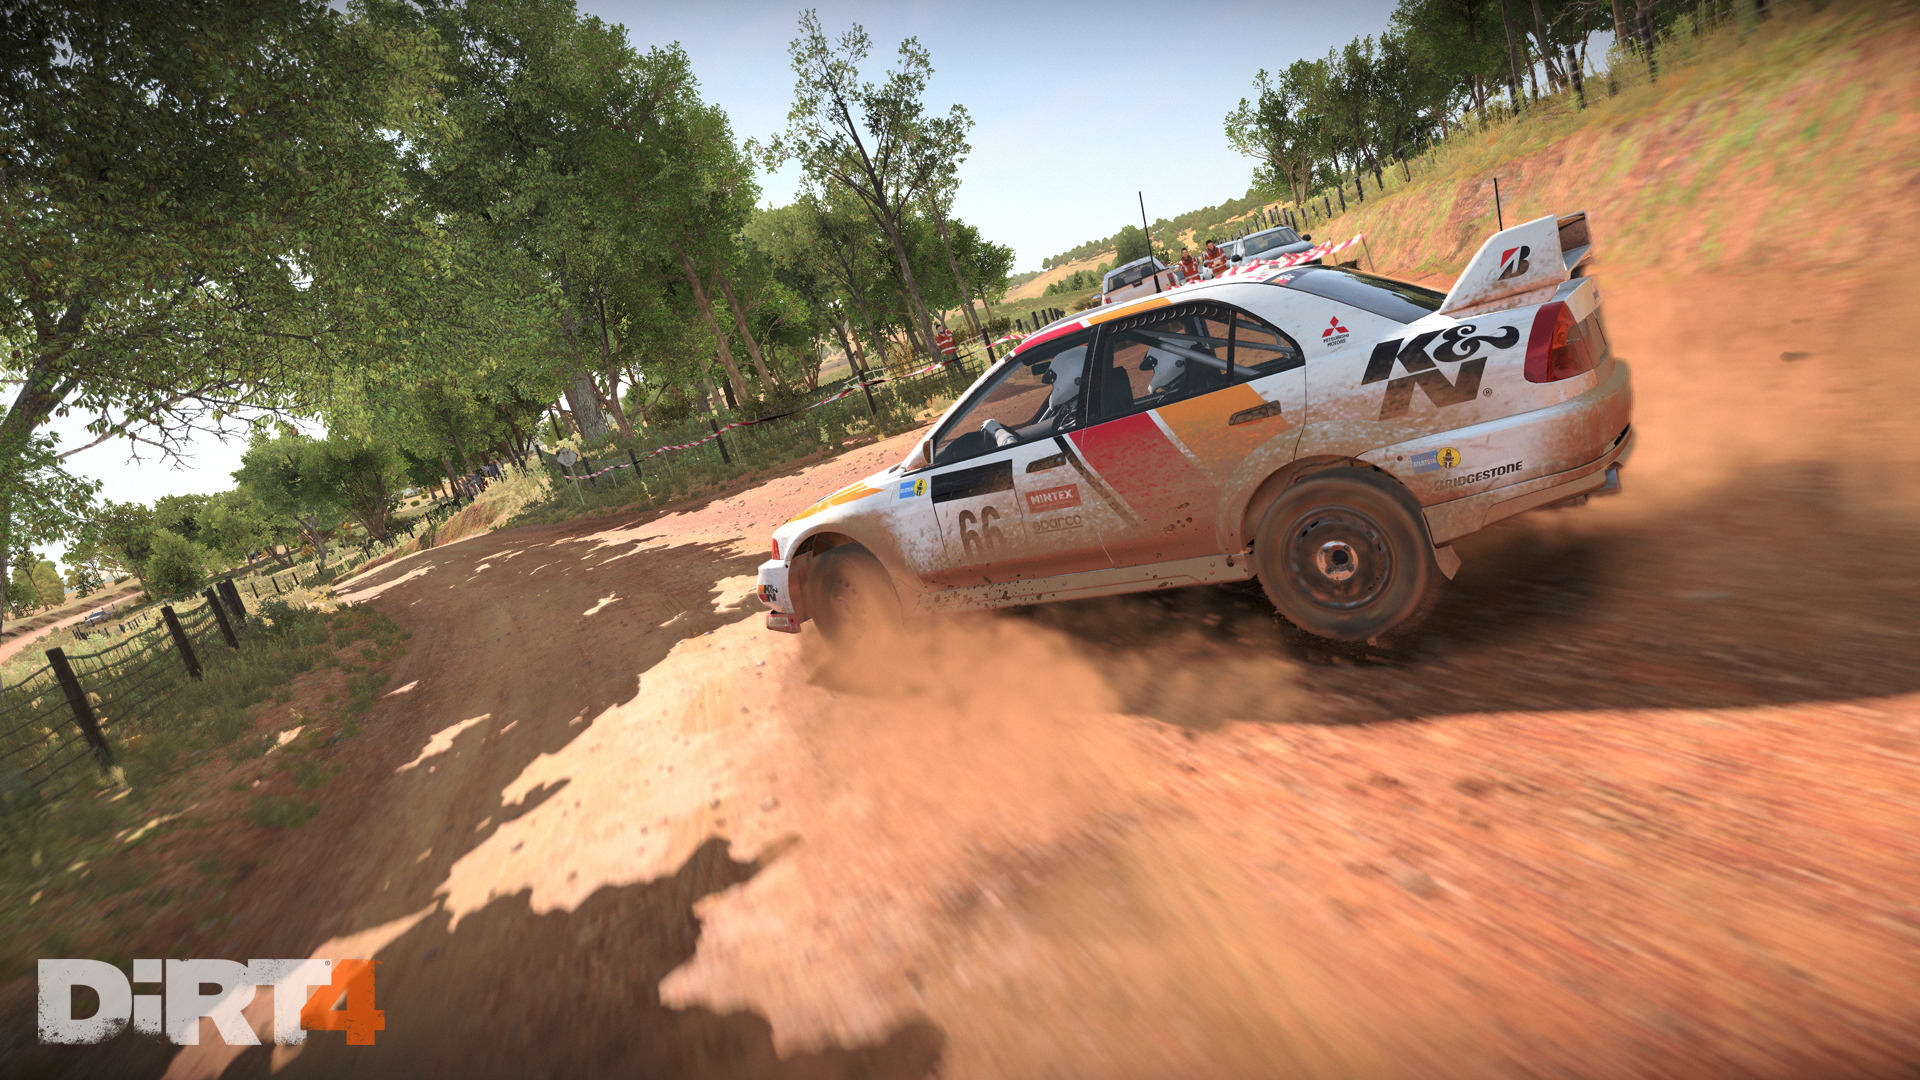 Dirt 4 HD Wallpaper | Background Image | 1920x1080 | ID:852211 - Wallpaper Abyss